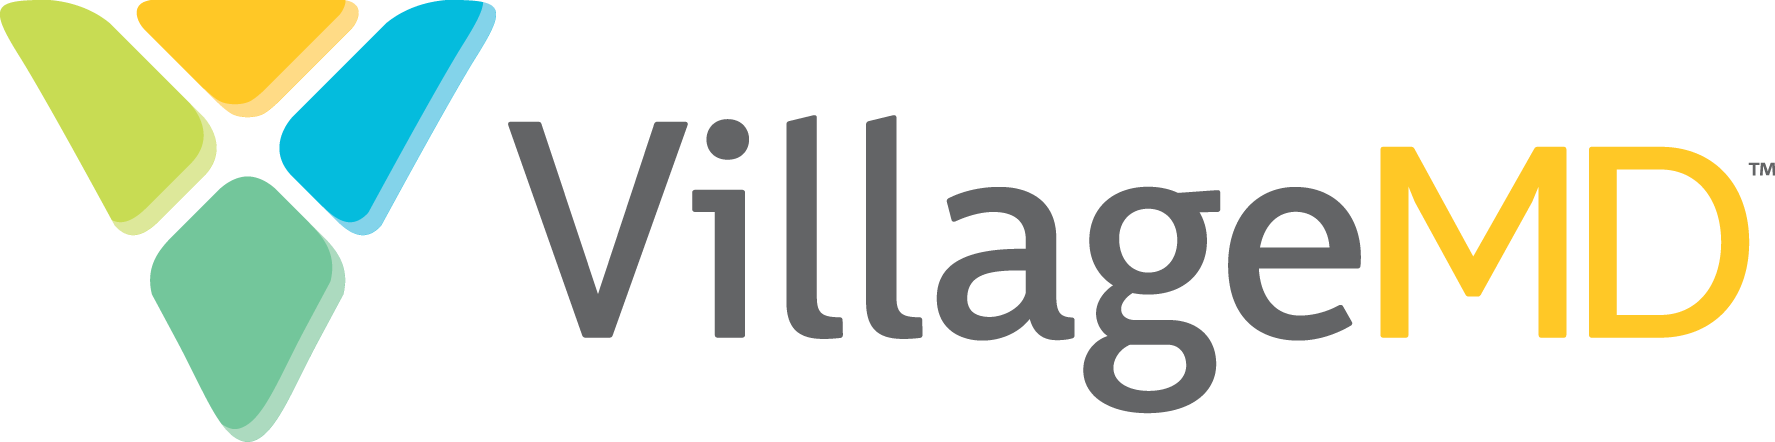 VillageMD Strengthens Presence in Houston with the Opening of Two Village Medical Primary Care Clinics